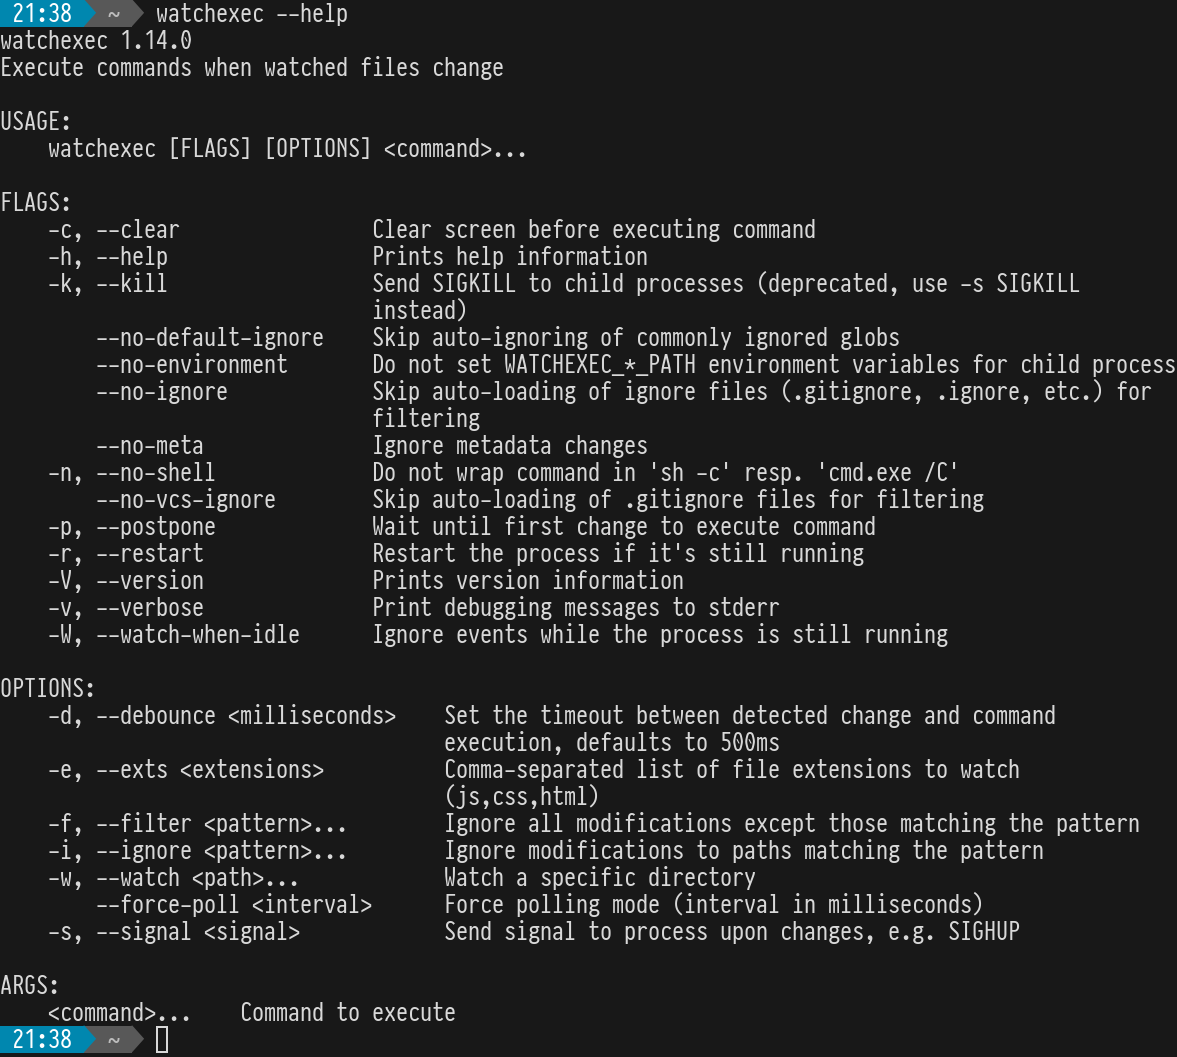 Screenshot of the output of watchexec --help in a terminal.